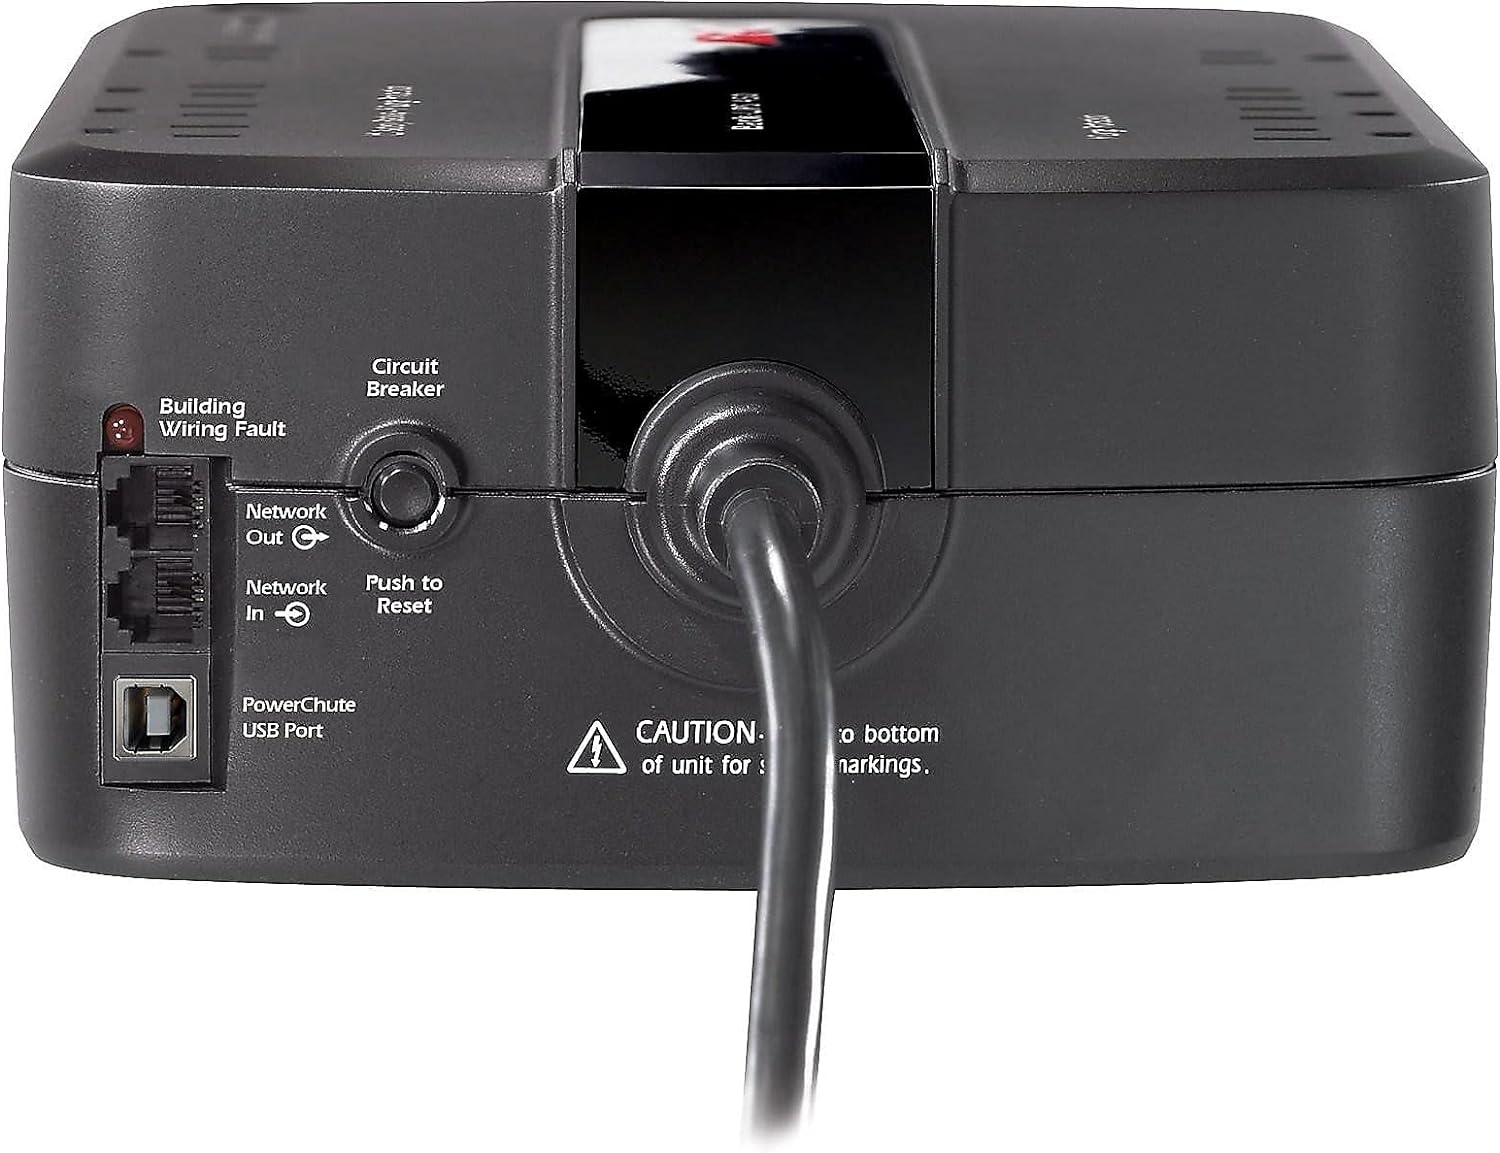 American Power Conversion (APC) Back-UPS 650 8 Outlet Surge Protector - $60